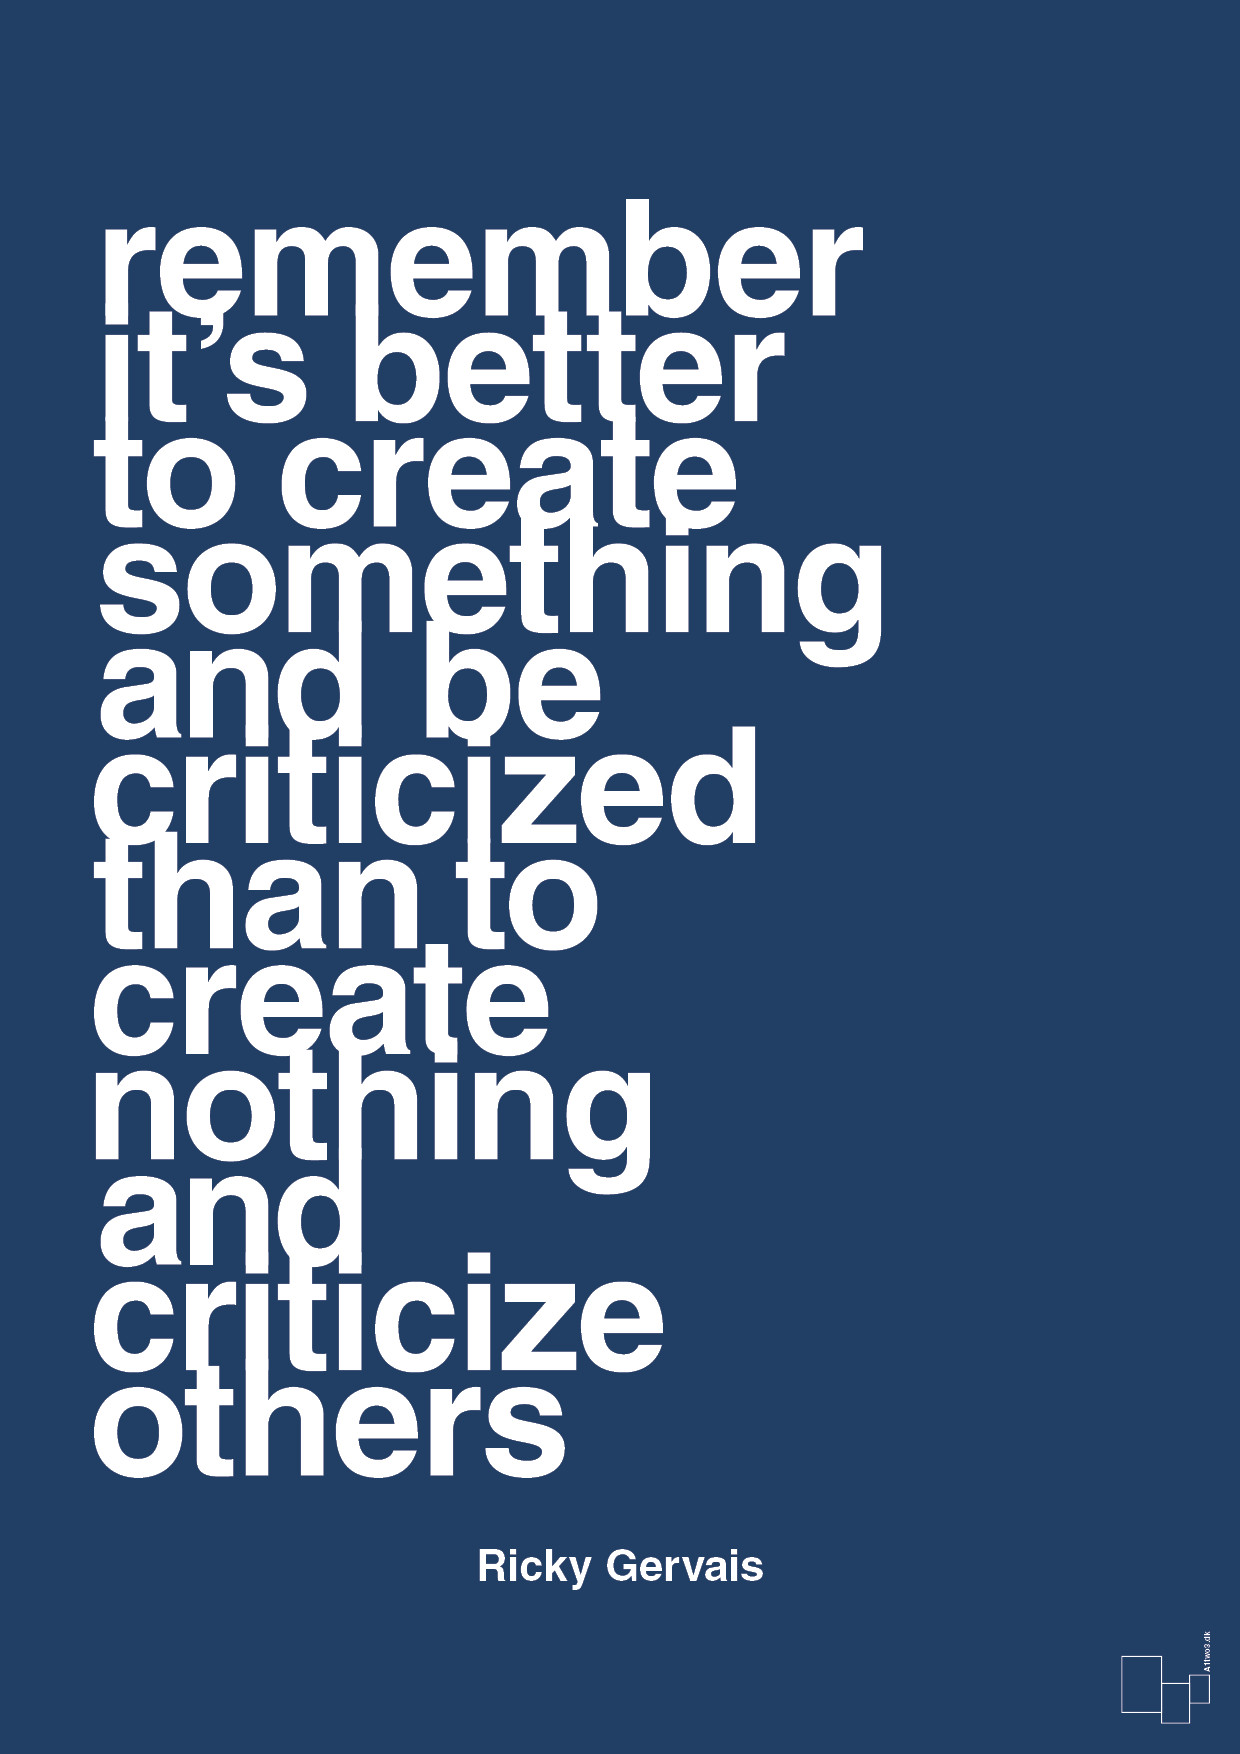 remember its better to create something and be criticized than create nothing and criticize others - Plakat med Citater i Lapis Blue